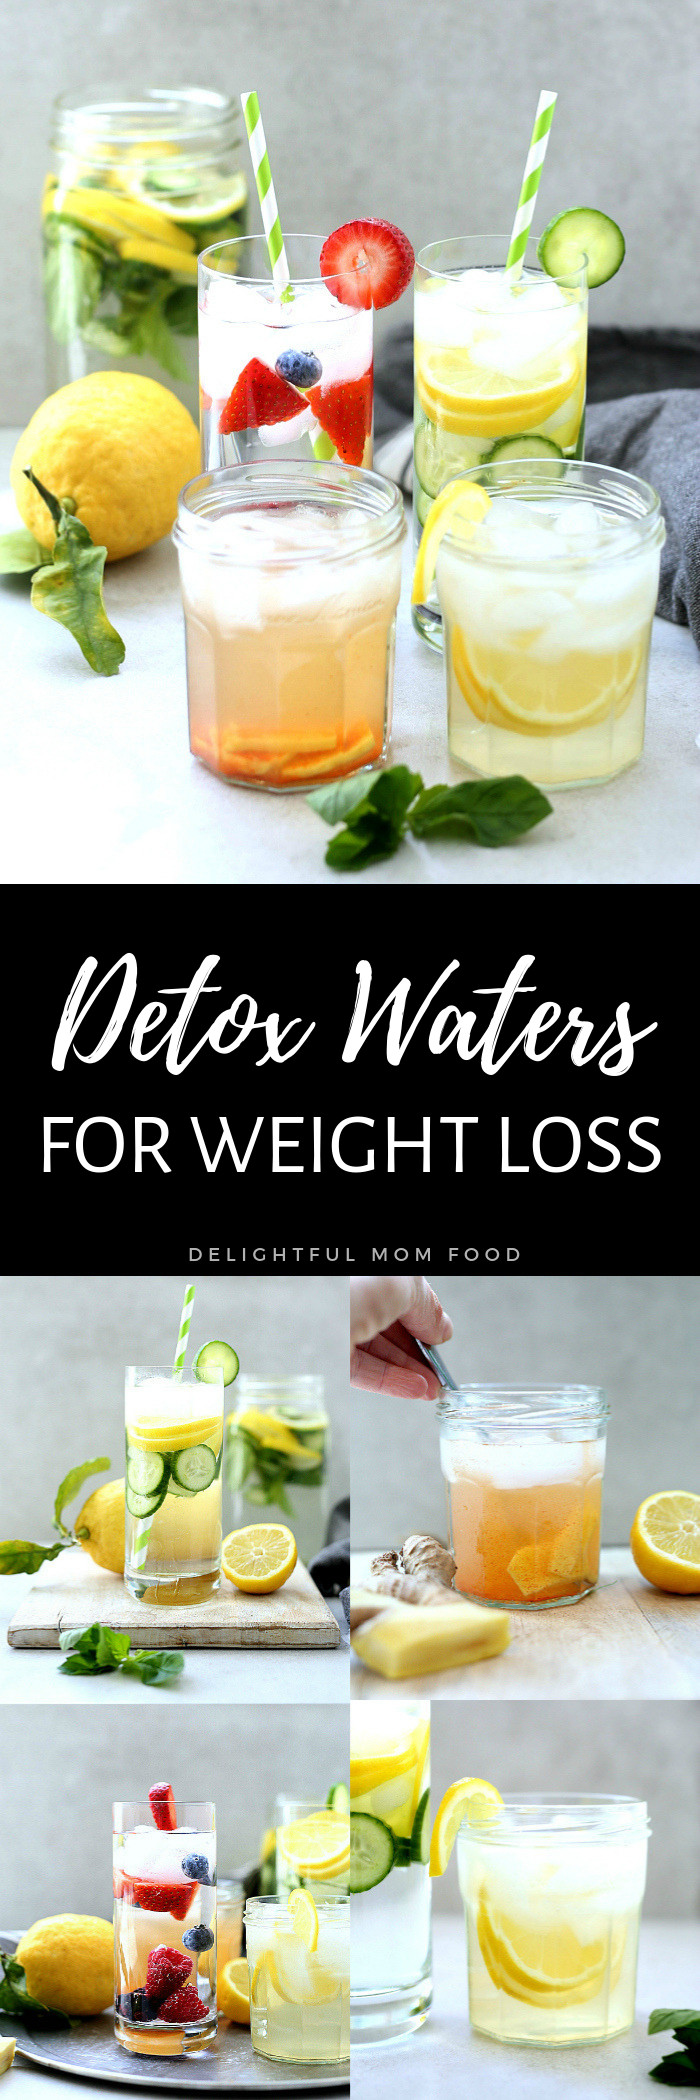 Weight Loss Detox Drink Recipes
 4 Detox Water Recipes For Weight Loss & Body Cleanse